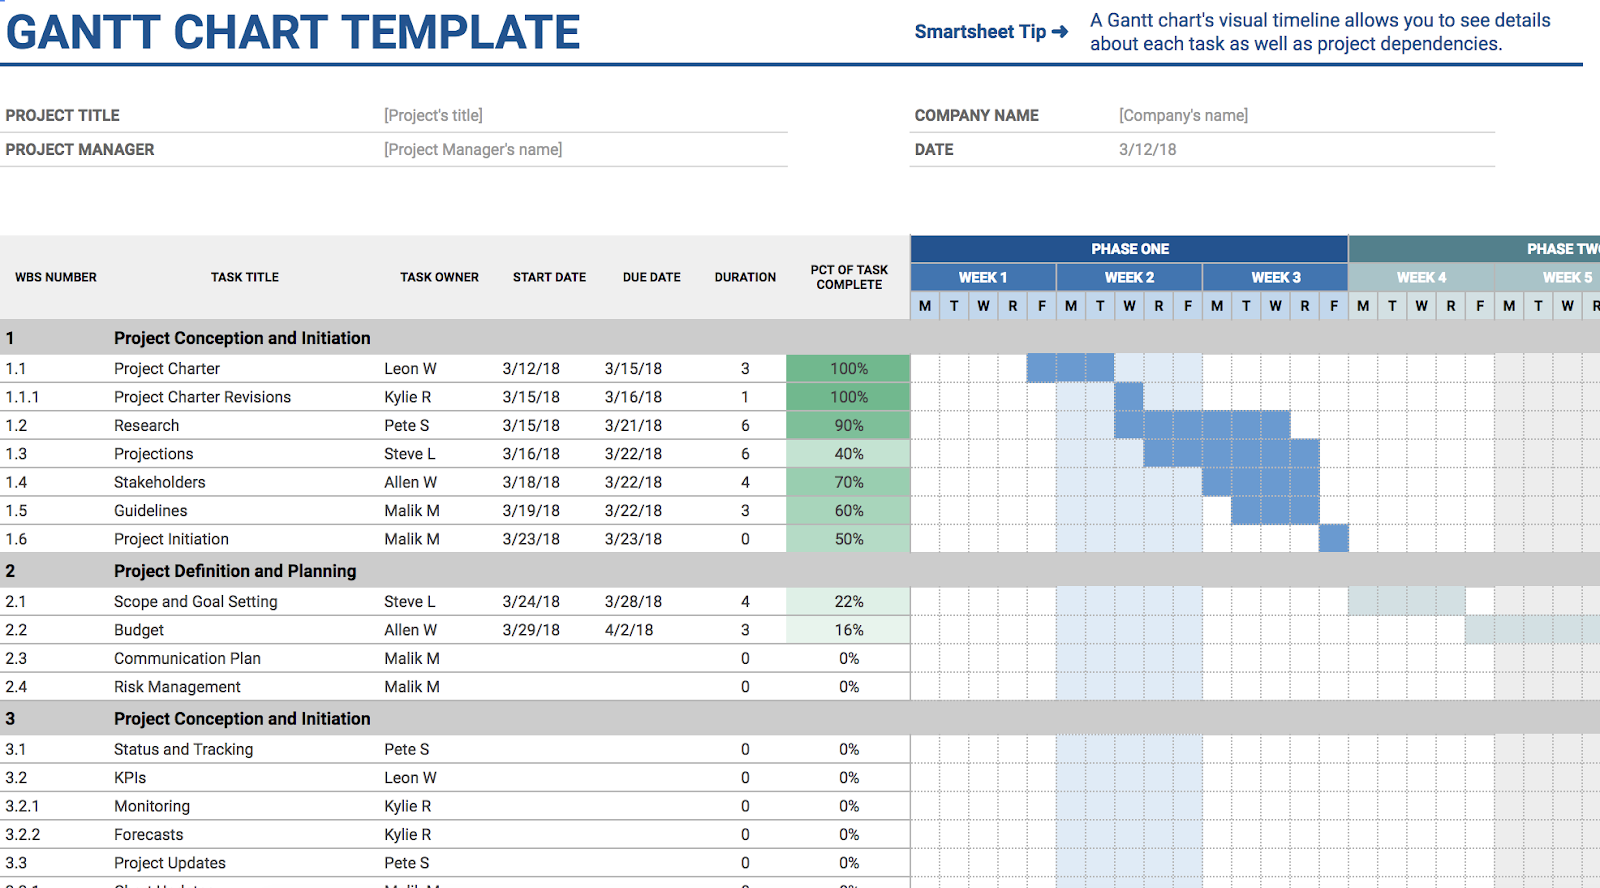 11 of the Best Free Google Sheets Templates for 2020